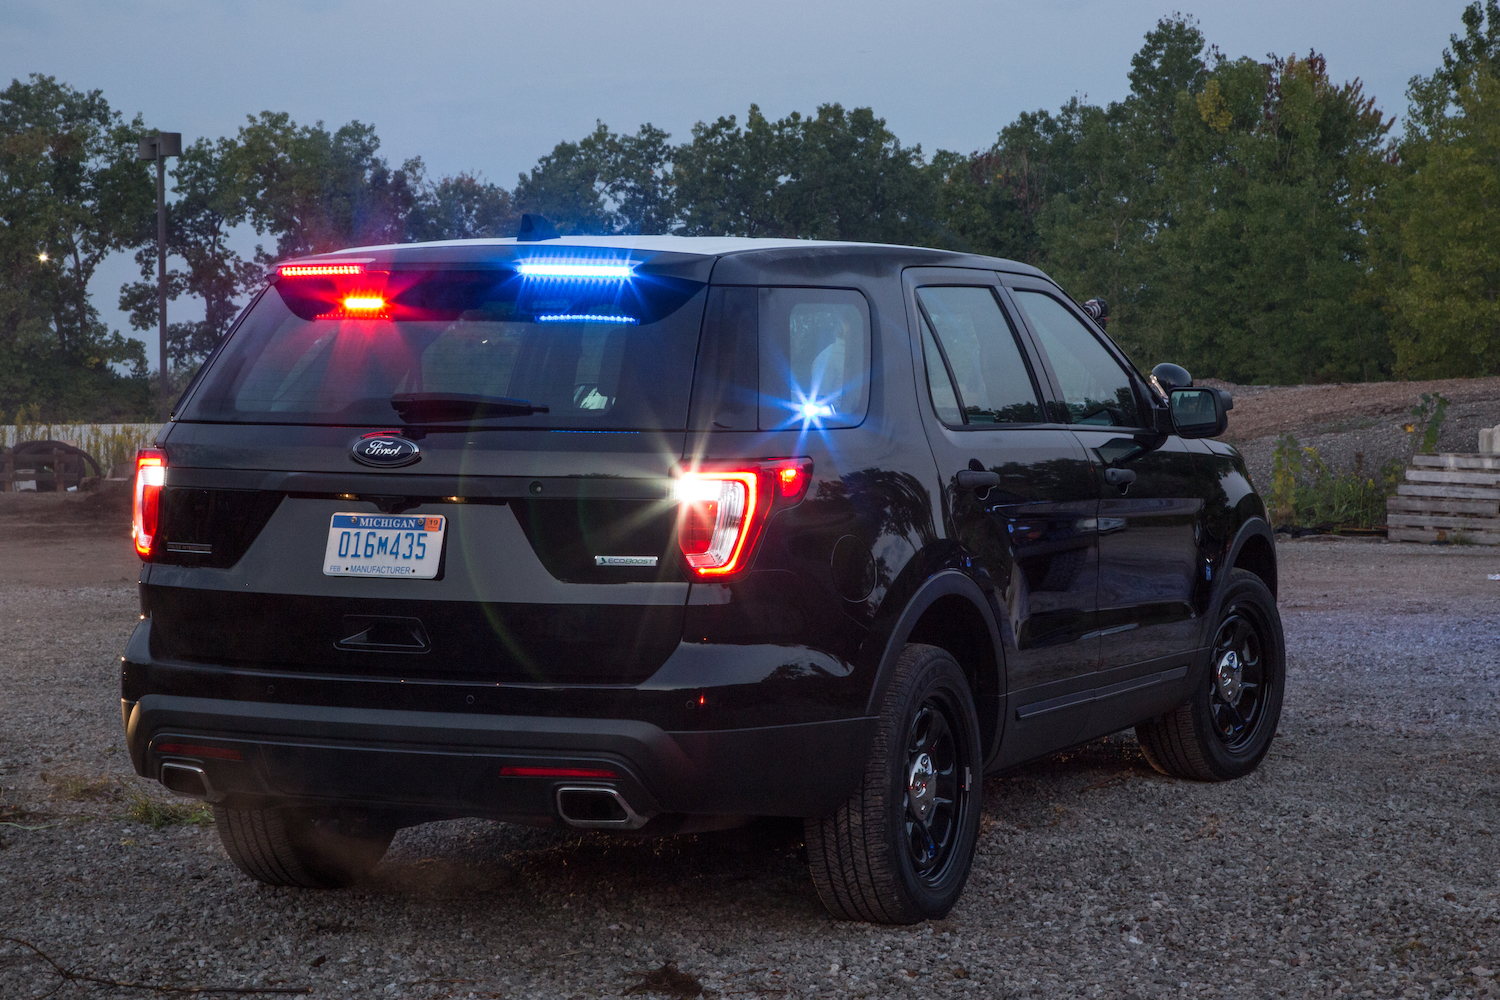 The back of a black Ford police SUV without the badge with a row of trees visible in the background.